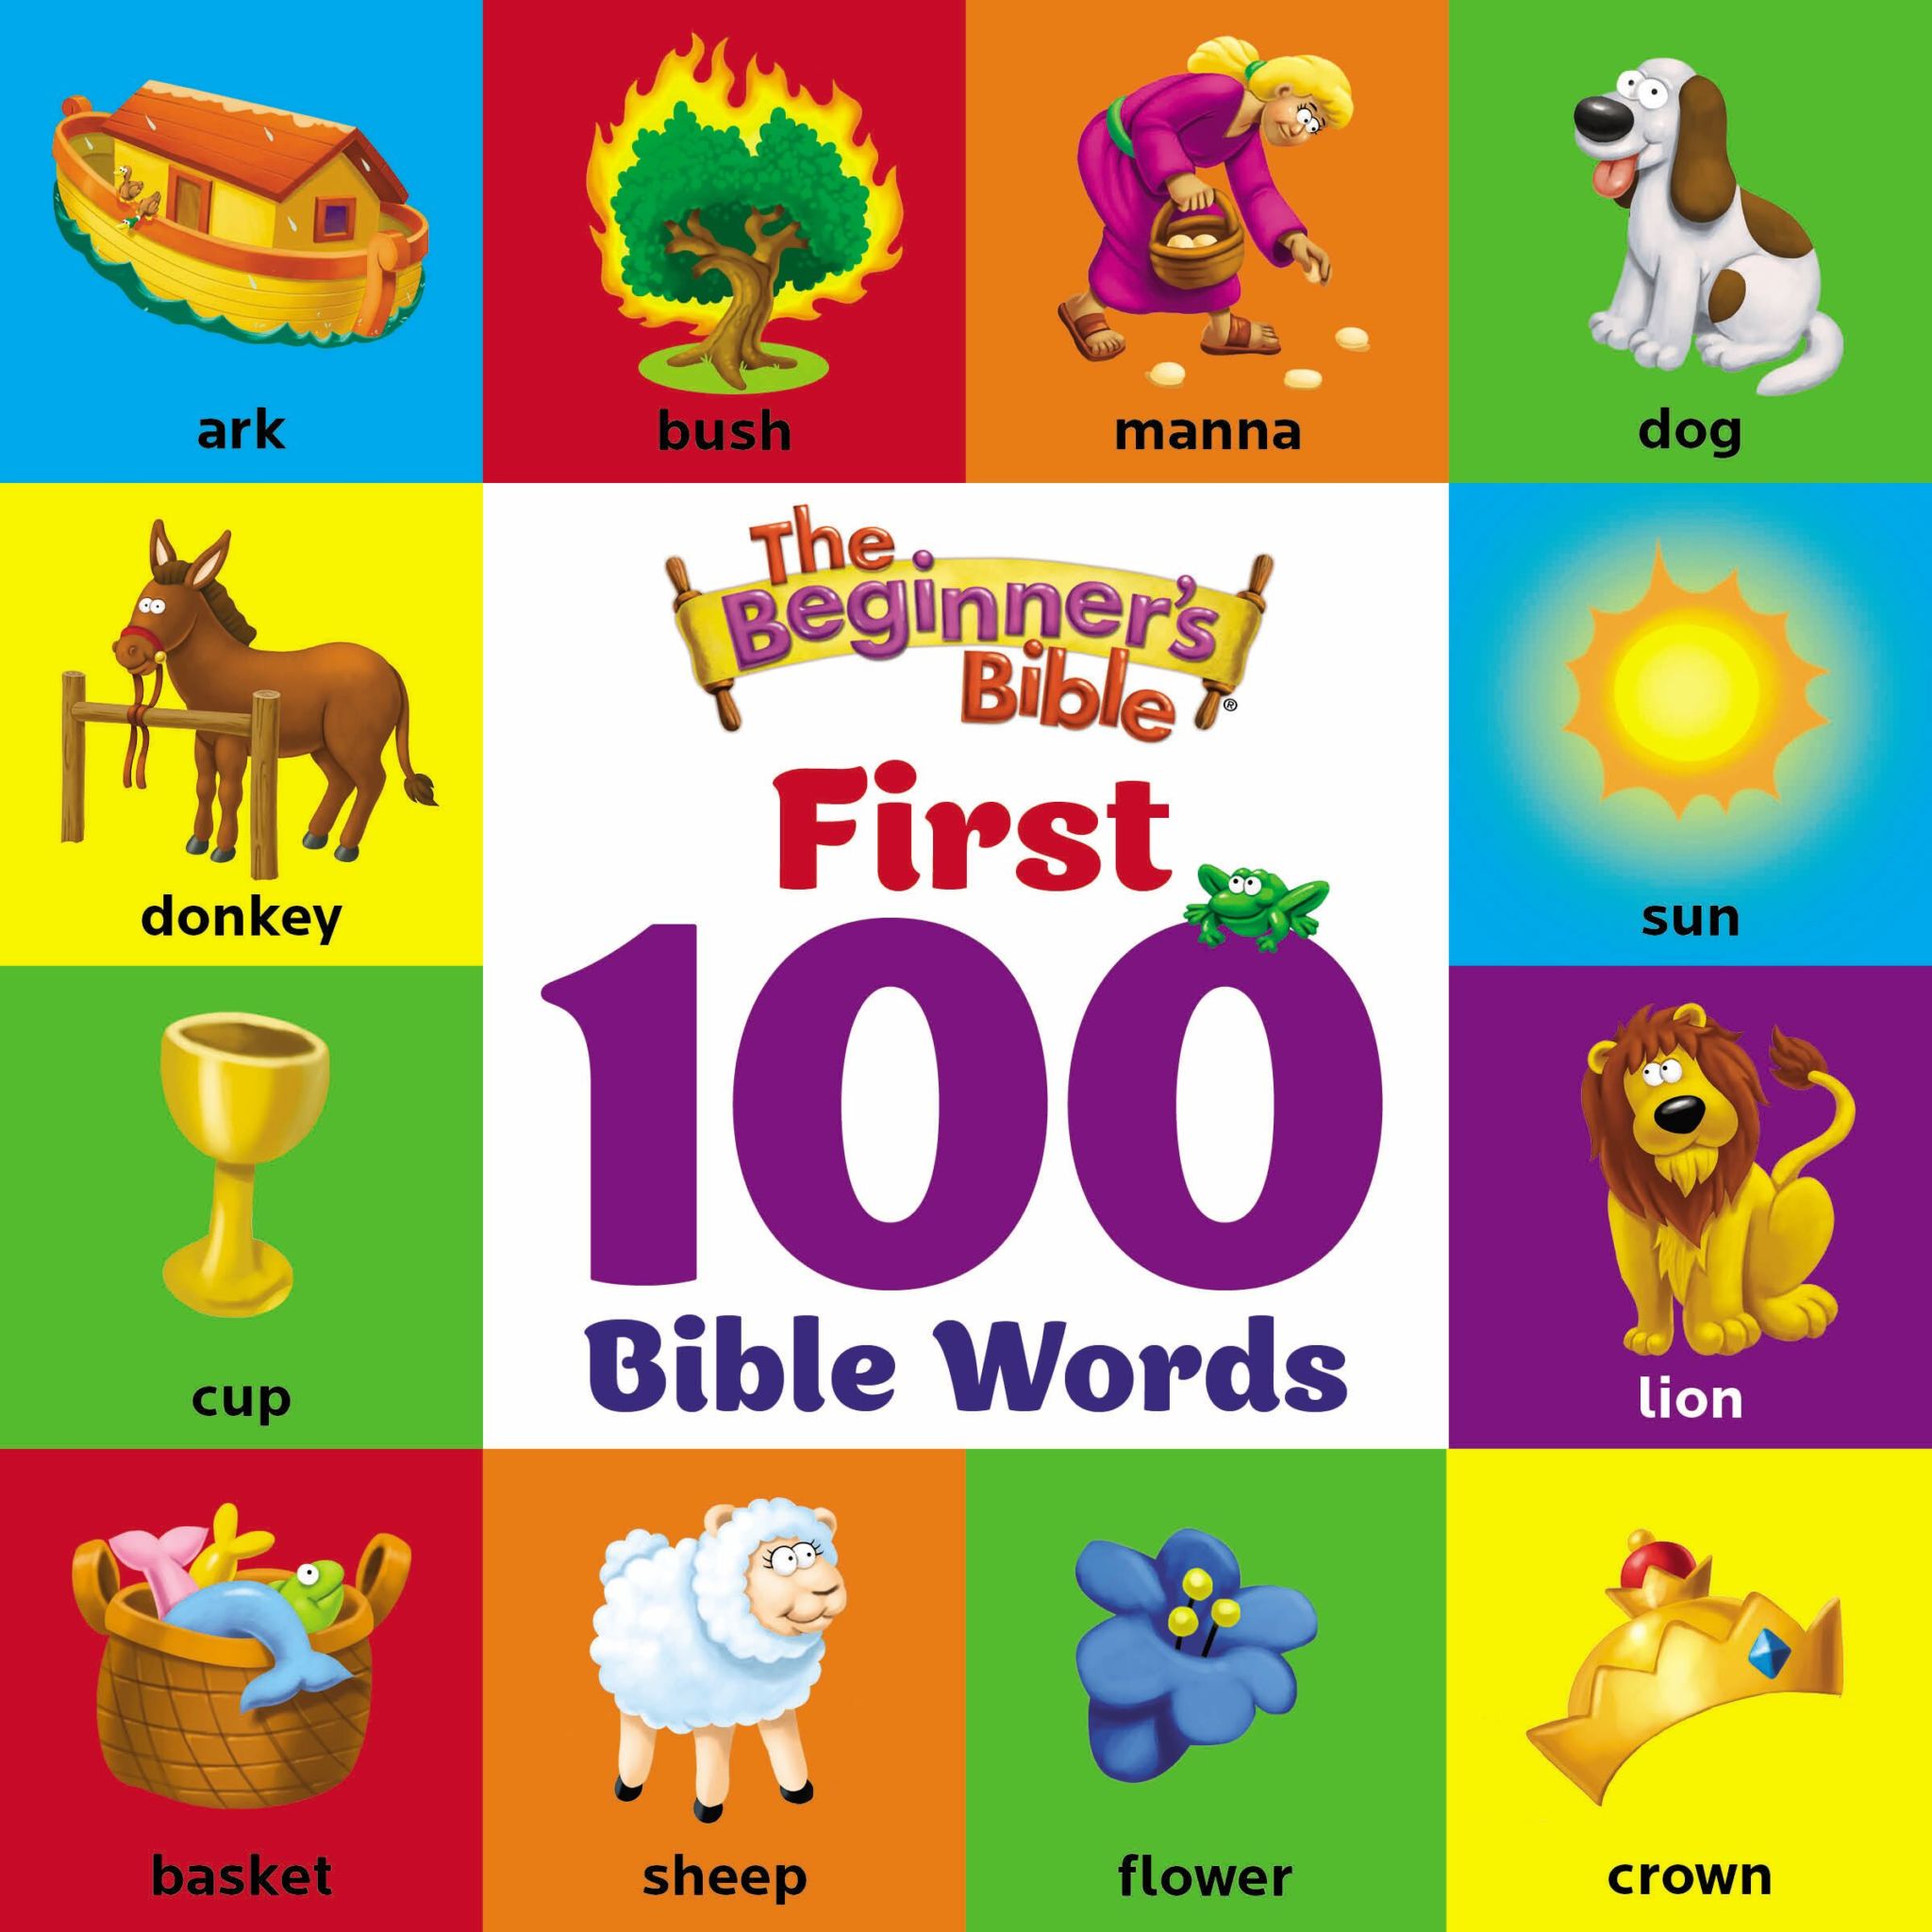 The Beginners Bible; First One 100 Bible Words